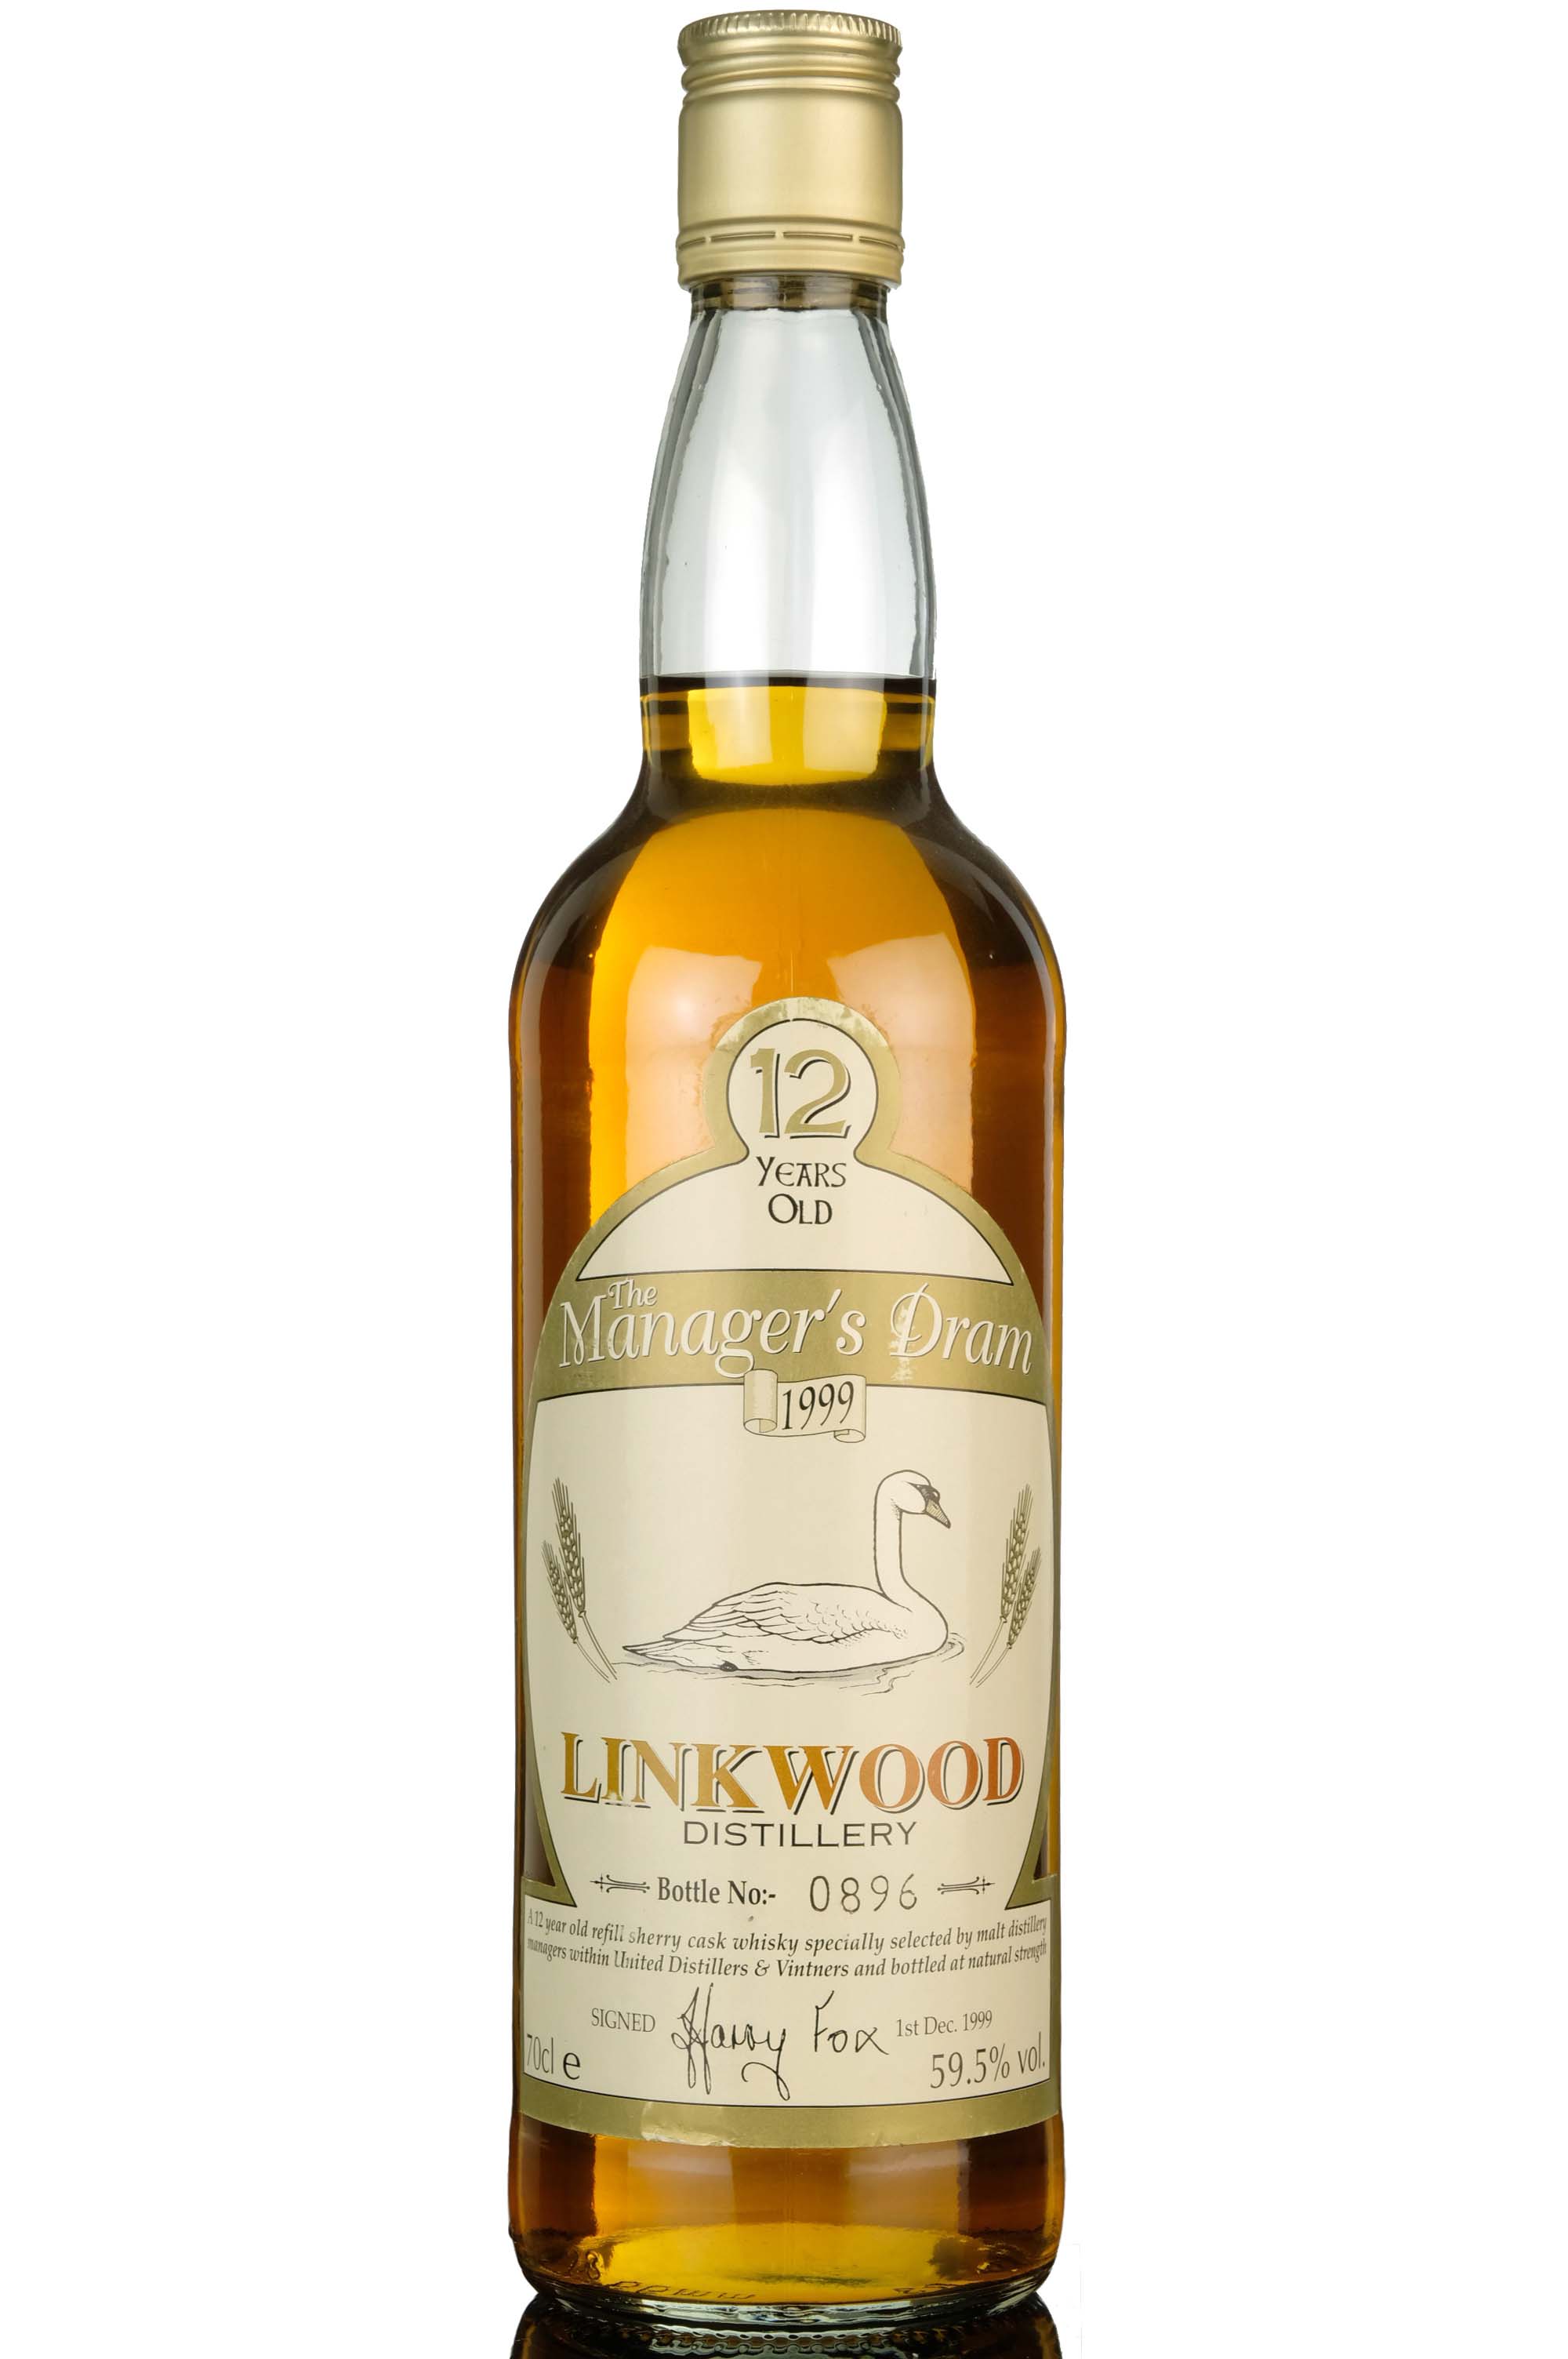 Linkwood 12 Year Old - Managers Dram 1999